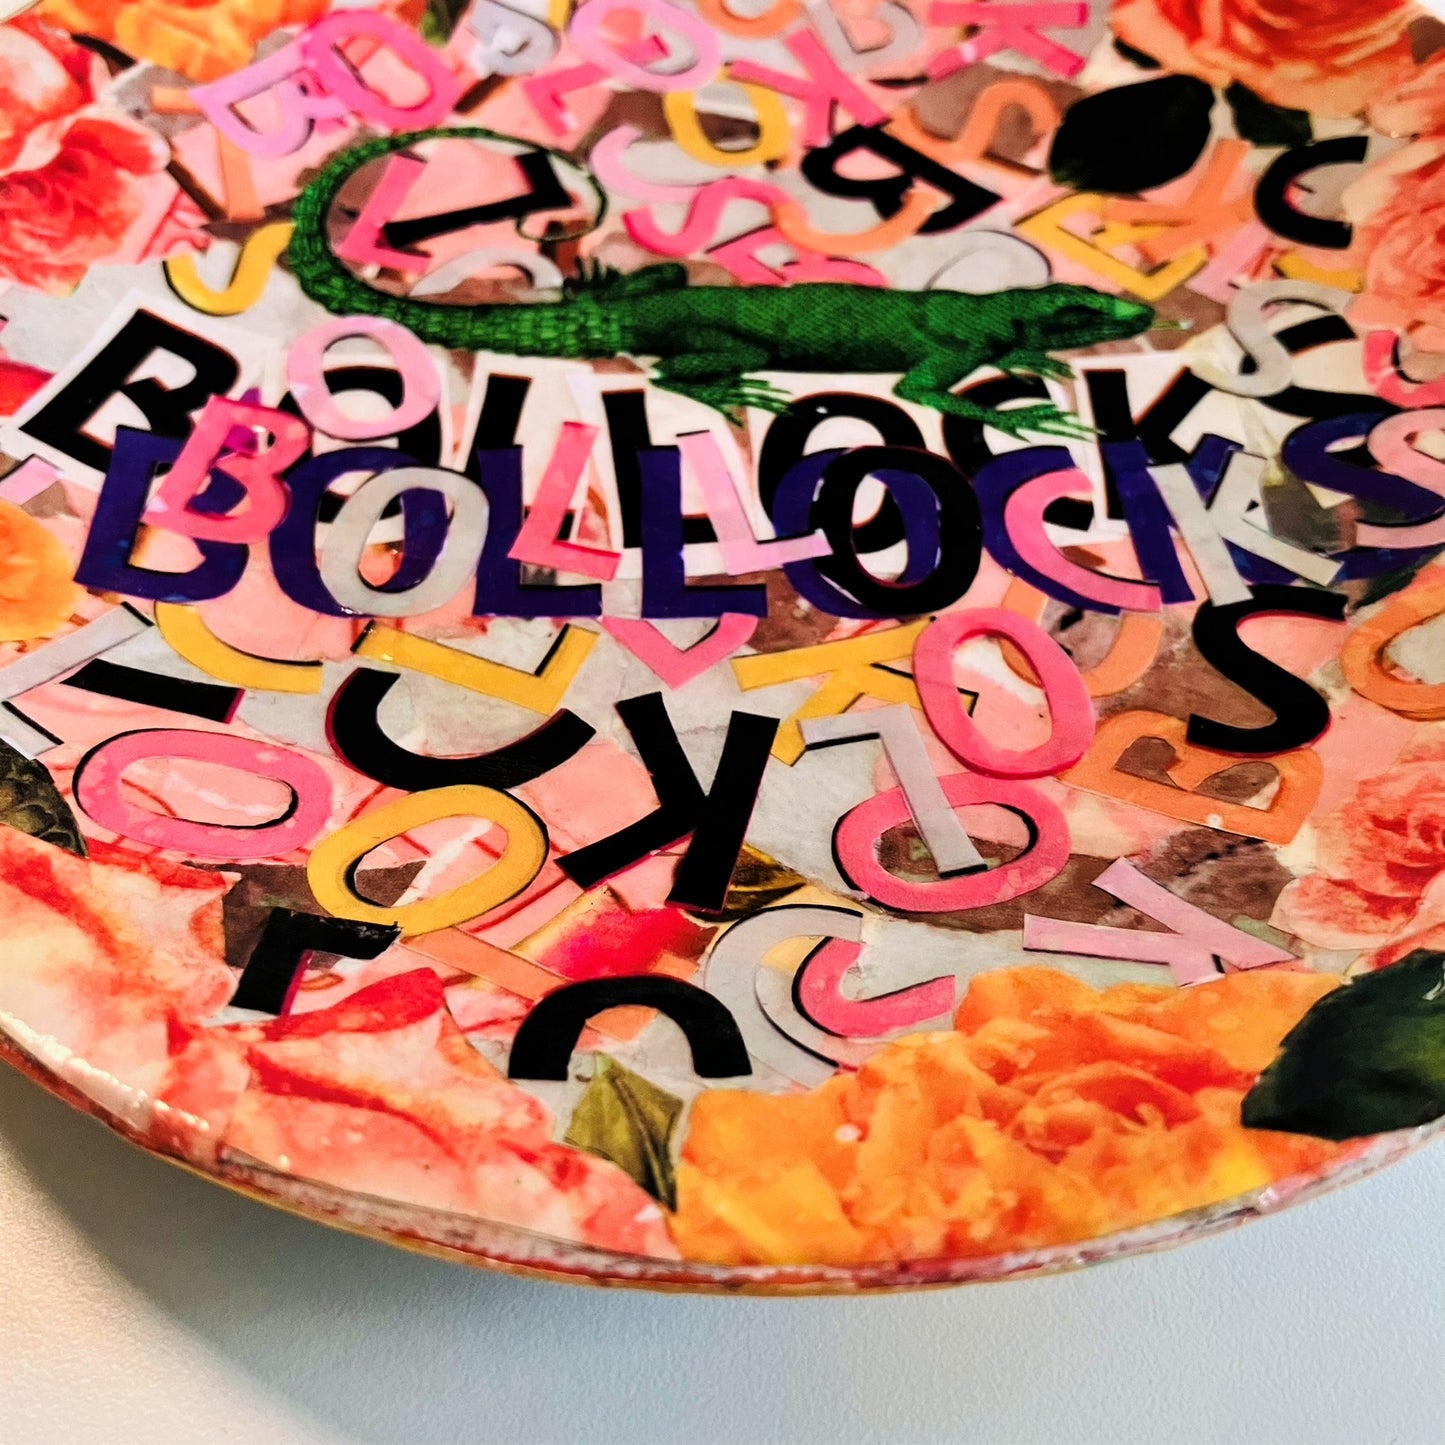 "Bollocks" Wall Plate by House of Frisson, featuring a collage of colourful letters forming the word "bollocks", and a lizard, framed by roses. Closeup detail showing the colourful letters.